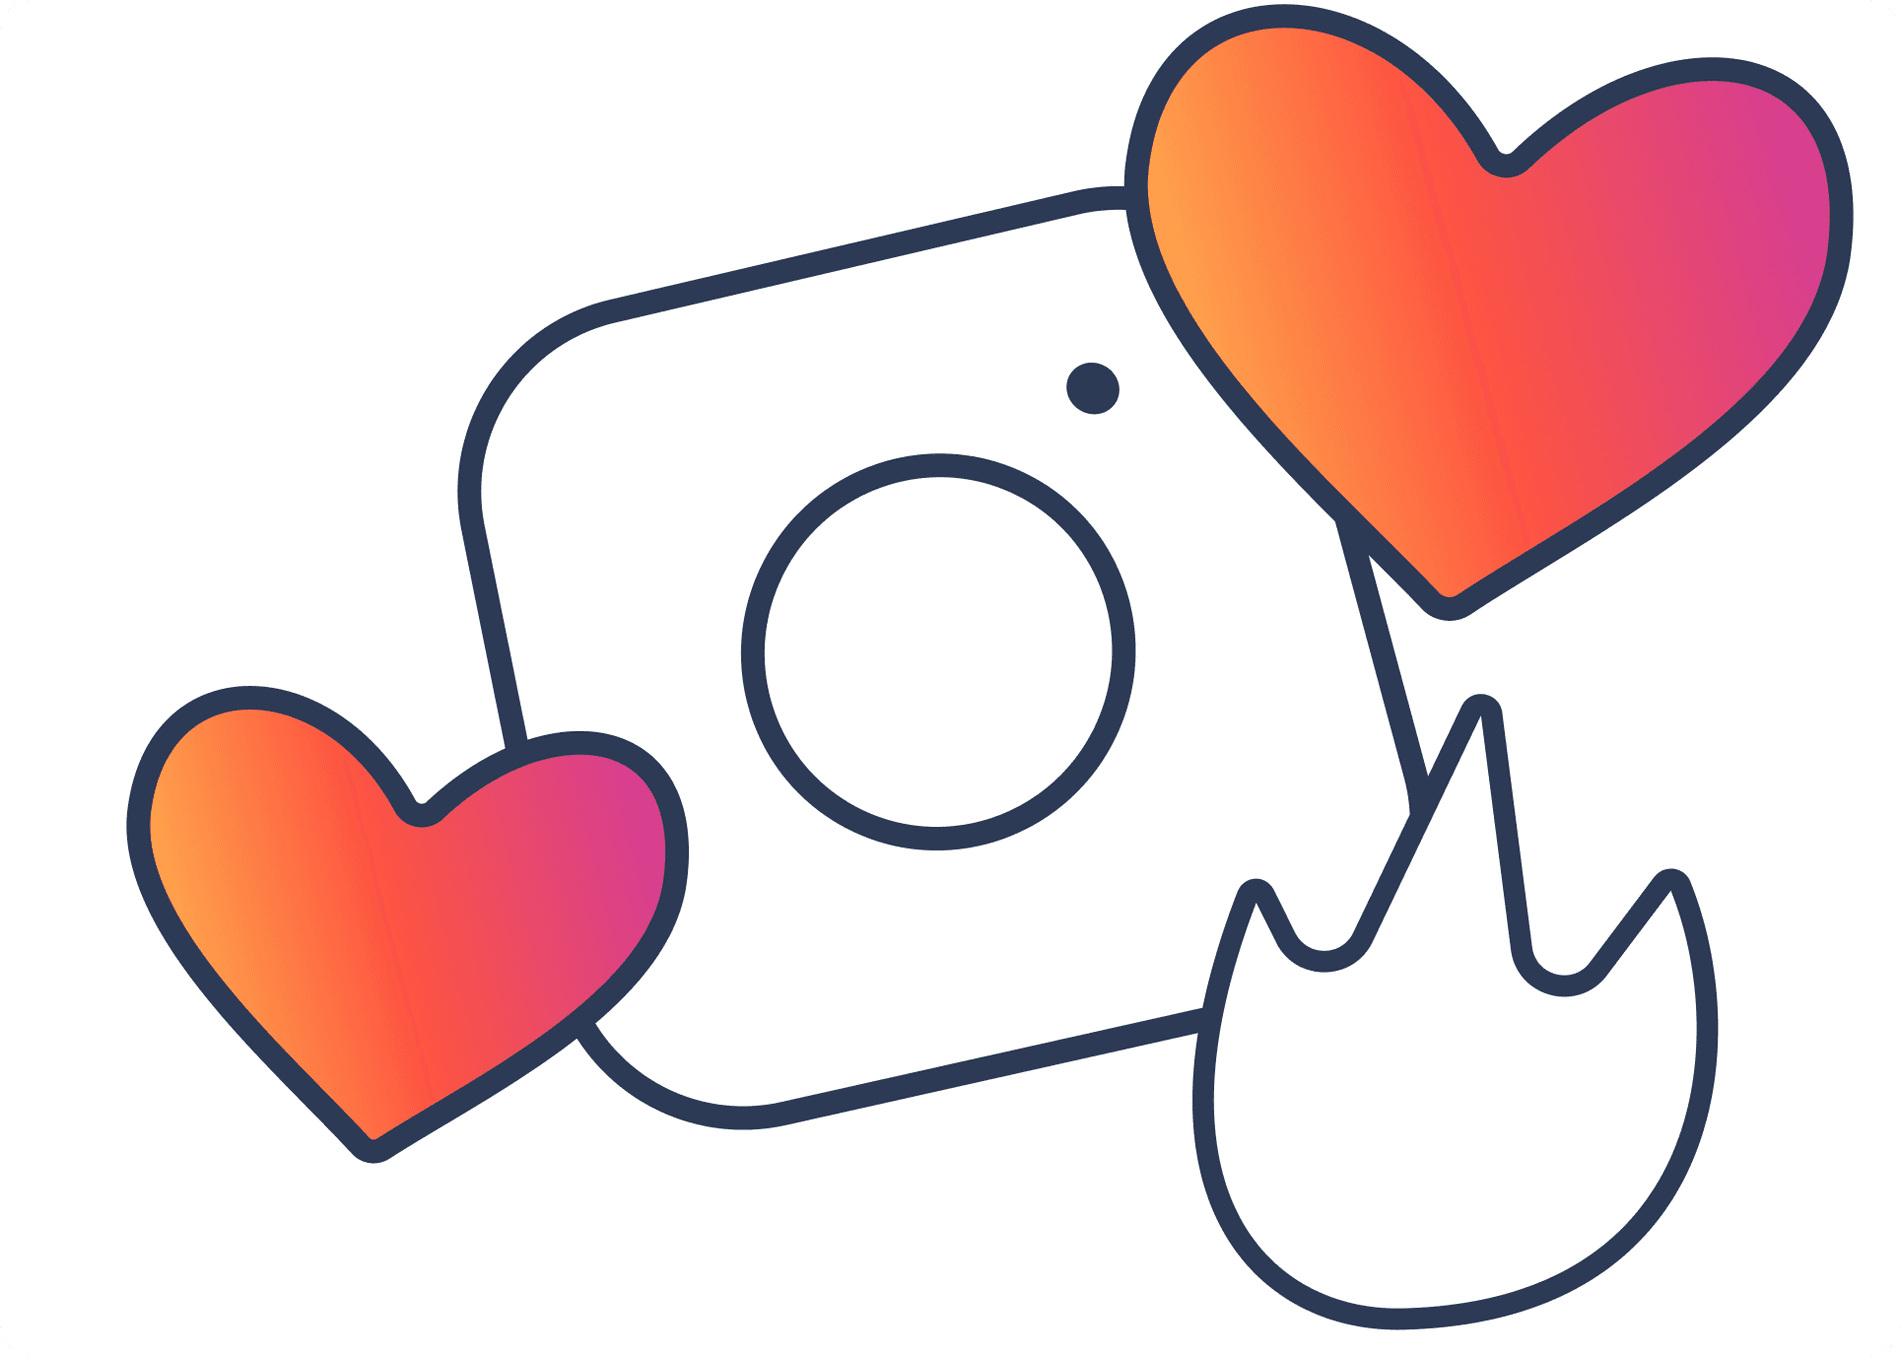 Automate your business on Instagram